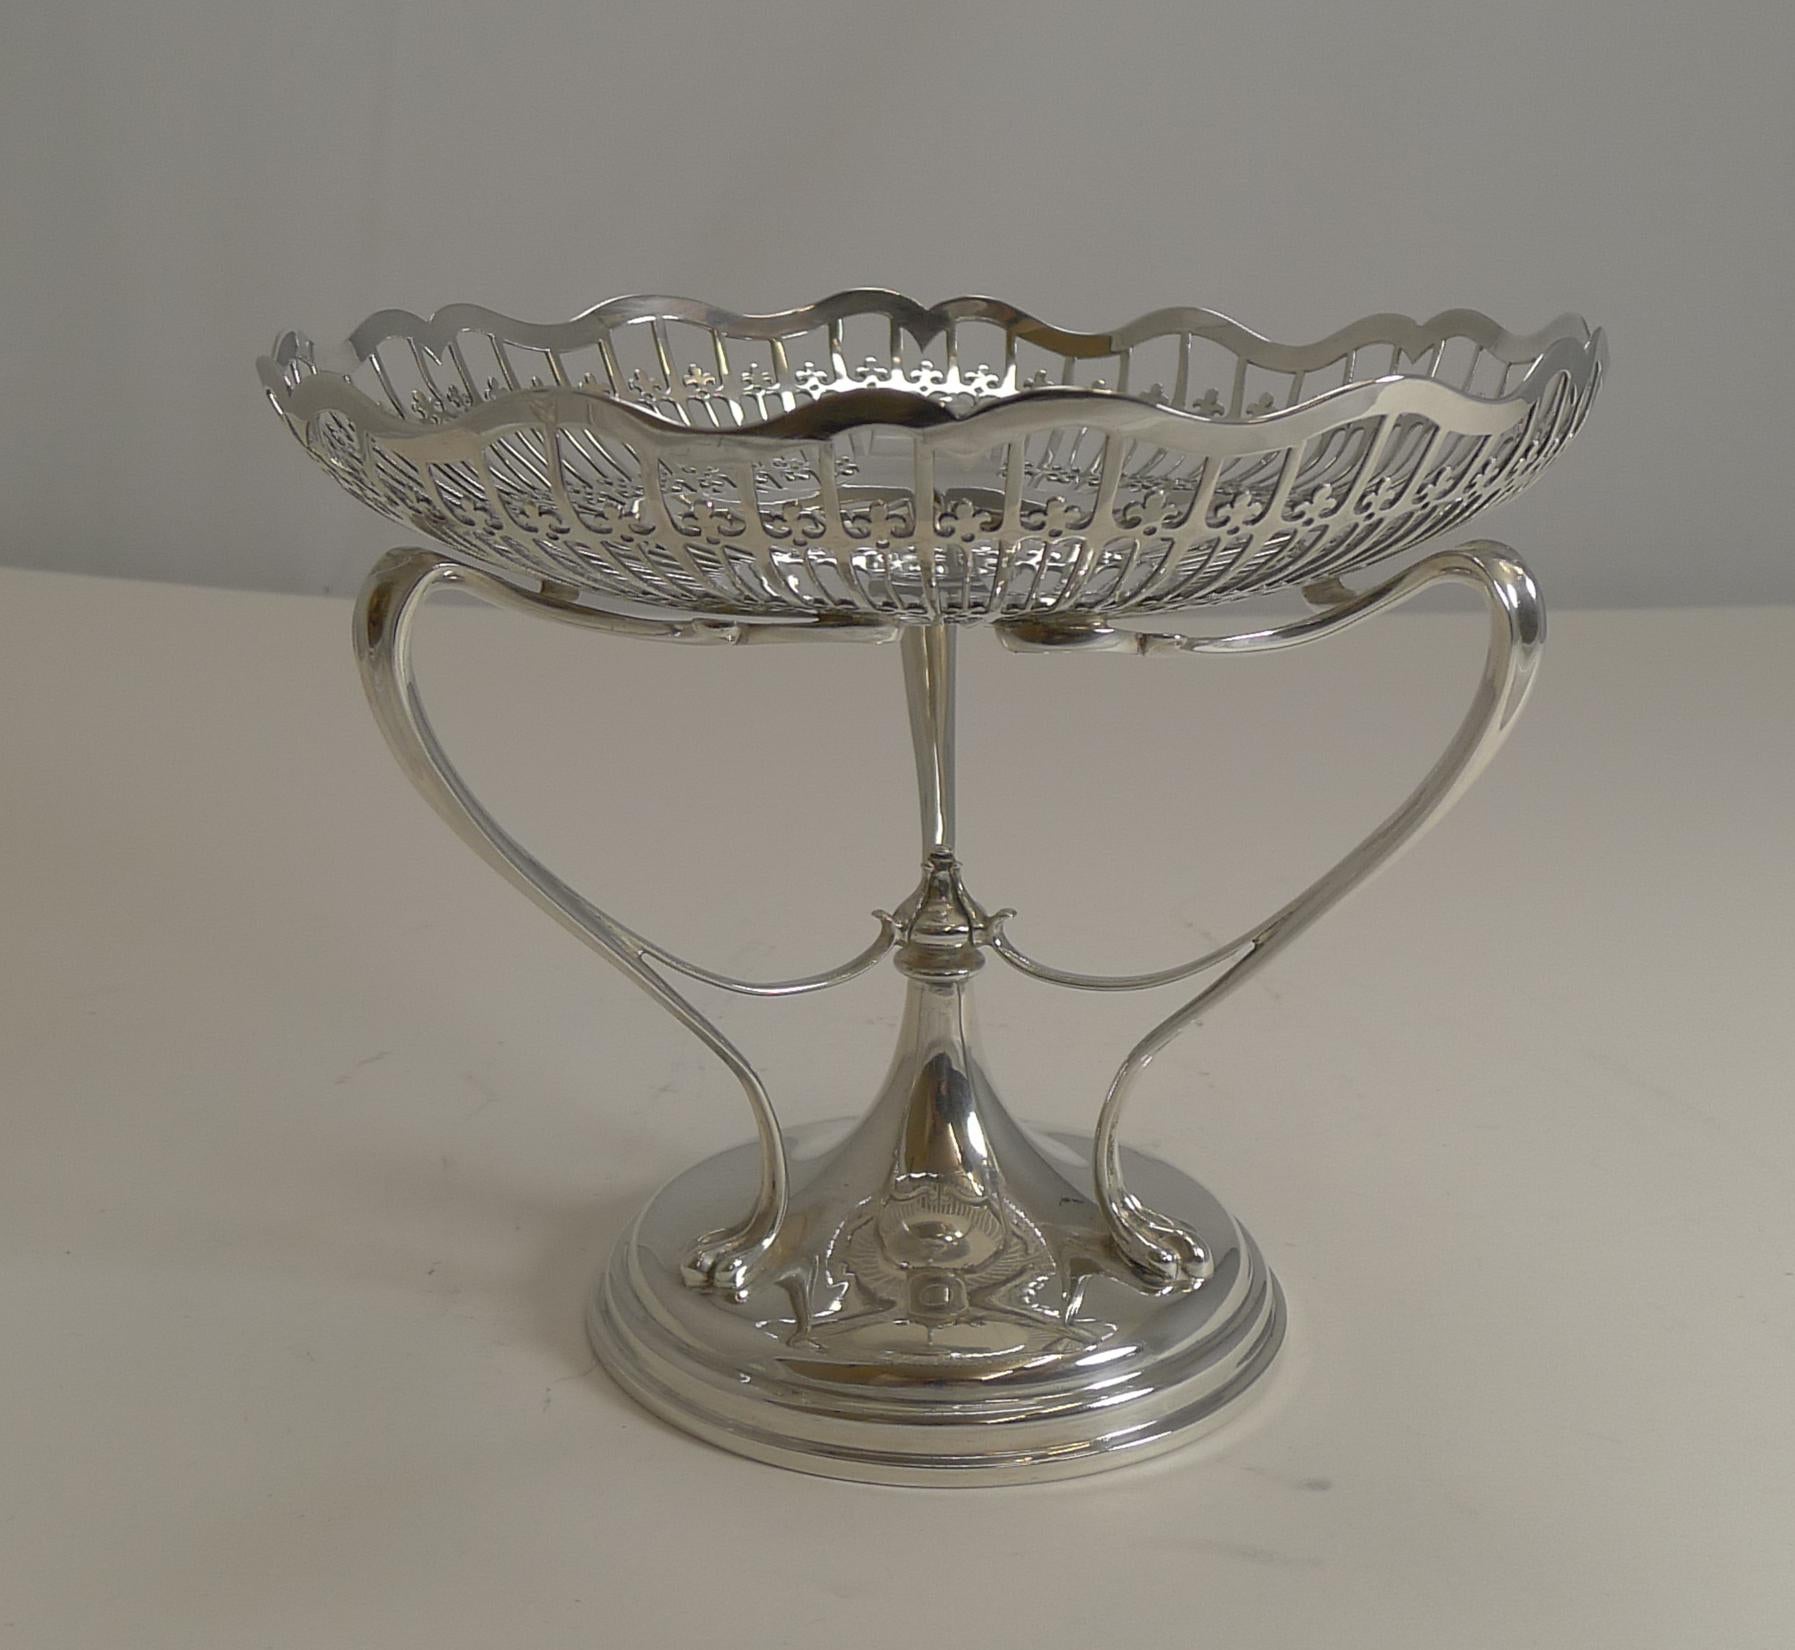 An exquisite top-quality Edwardian sterling silver comport with an Art Nouveau design seen in the organically shaped supports from the base to the bowl.

The bowl is beautifully pieced or reticulated with an elegantly shaped rim.

The silver is